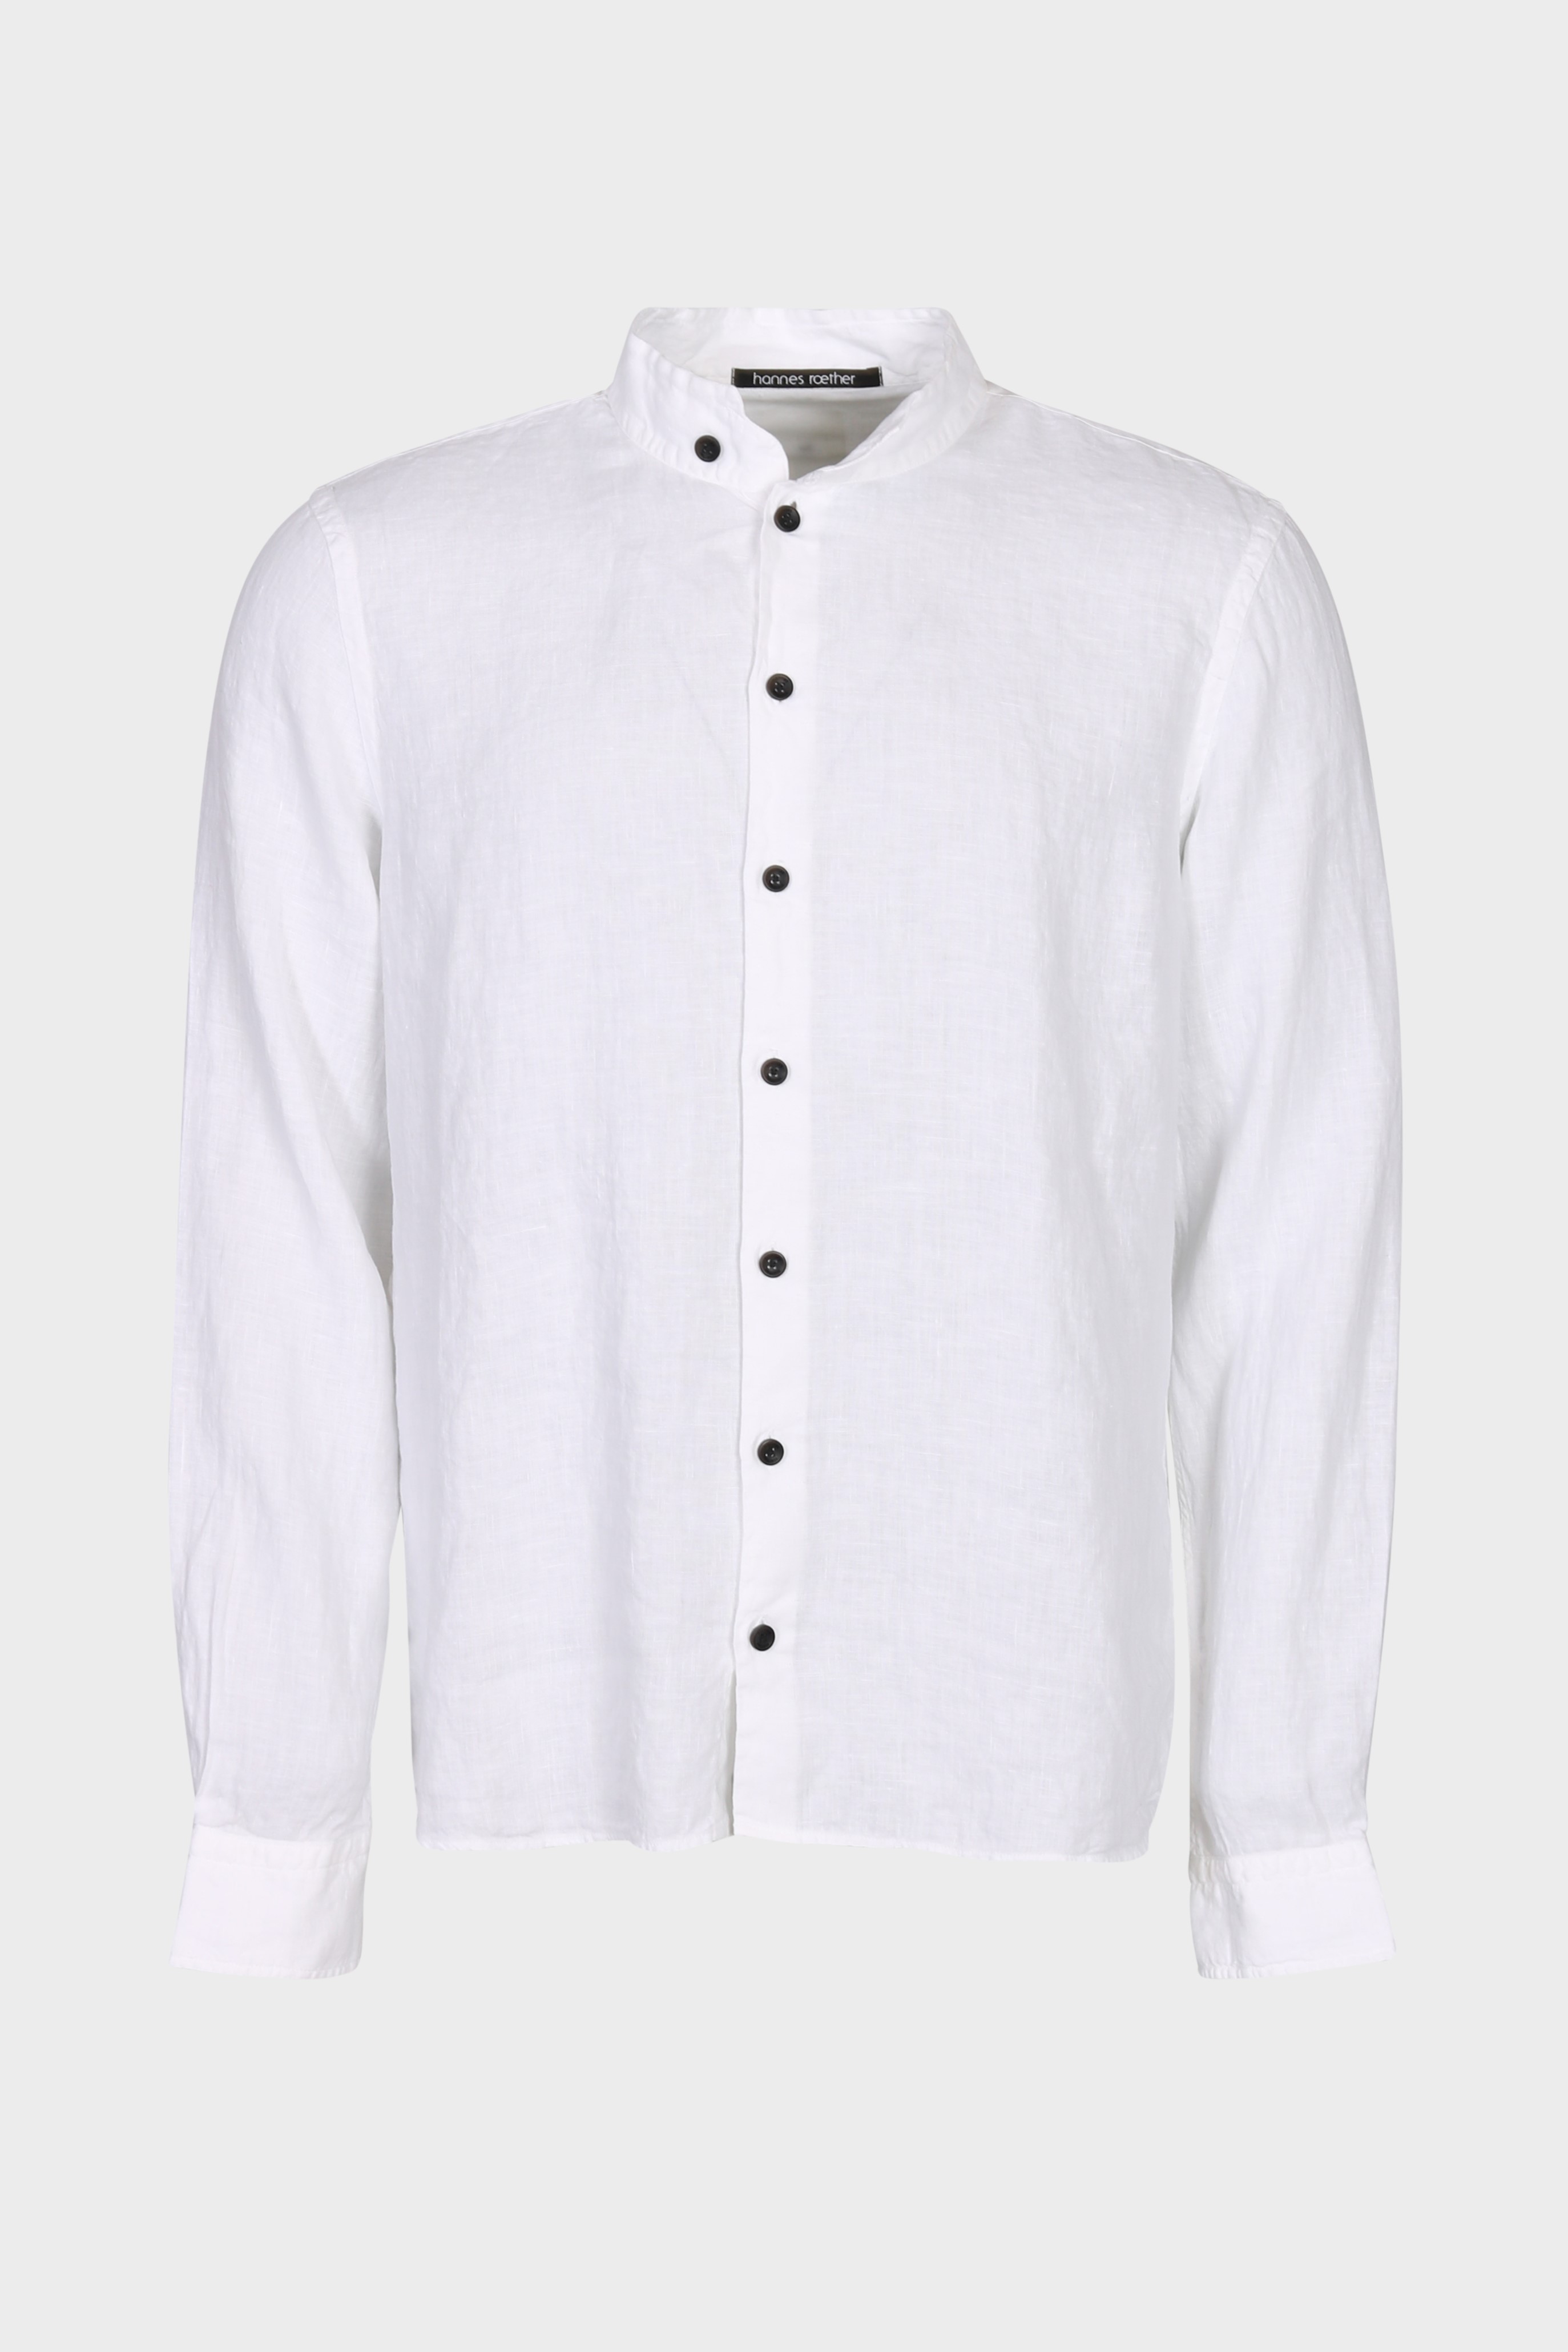 HANNES ROETHER Linen Shirt in White M